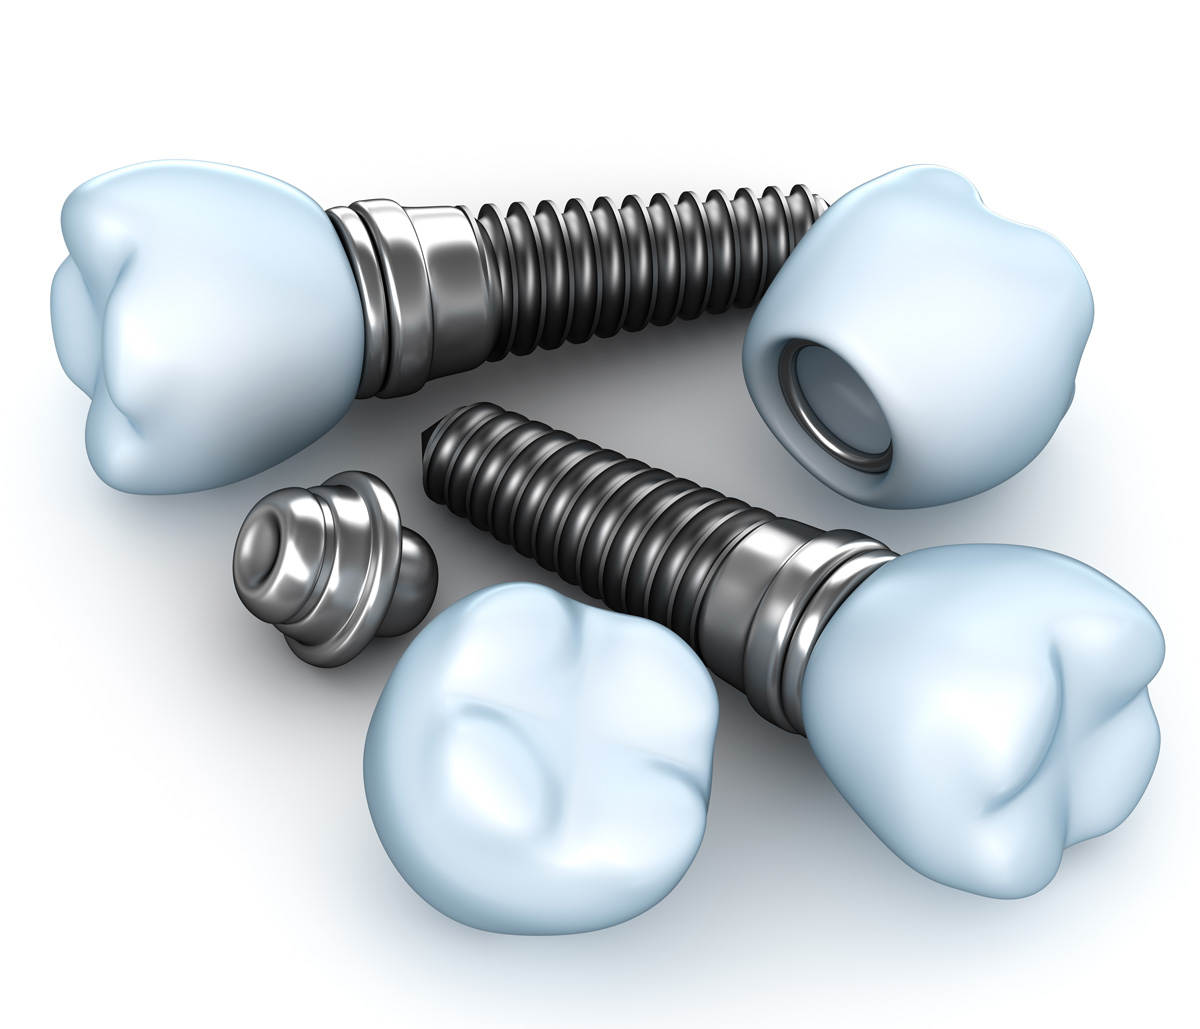 Single Tooth Dental Implant Near Me in San Francisco Area